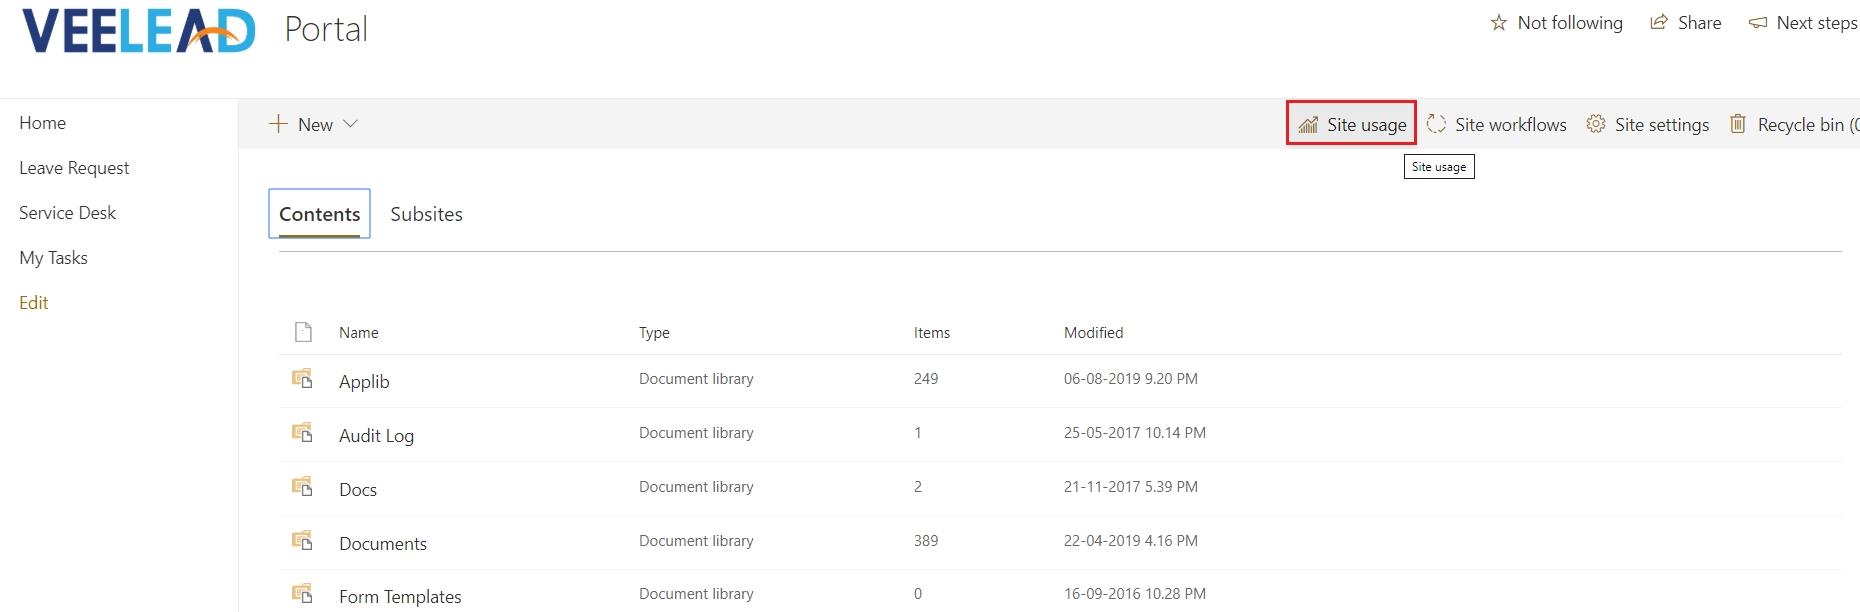 SharePoint Site contents